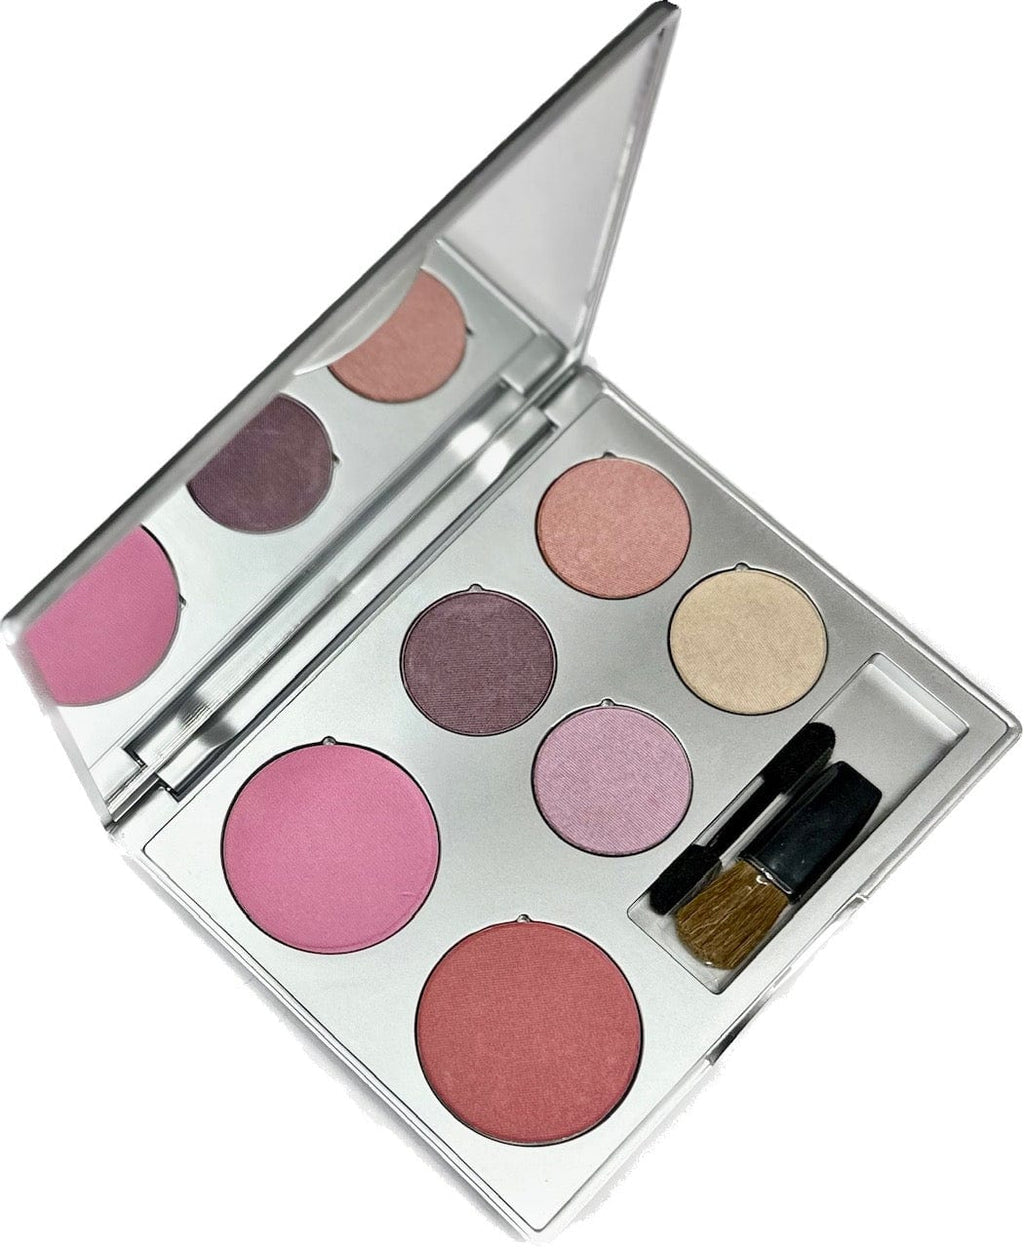 Danyel Cosmetics Eyeshadow Wine Cellar Collection - Cocktail Party From Danyel Cosmetics